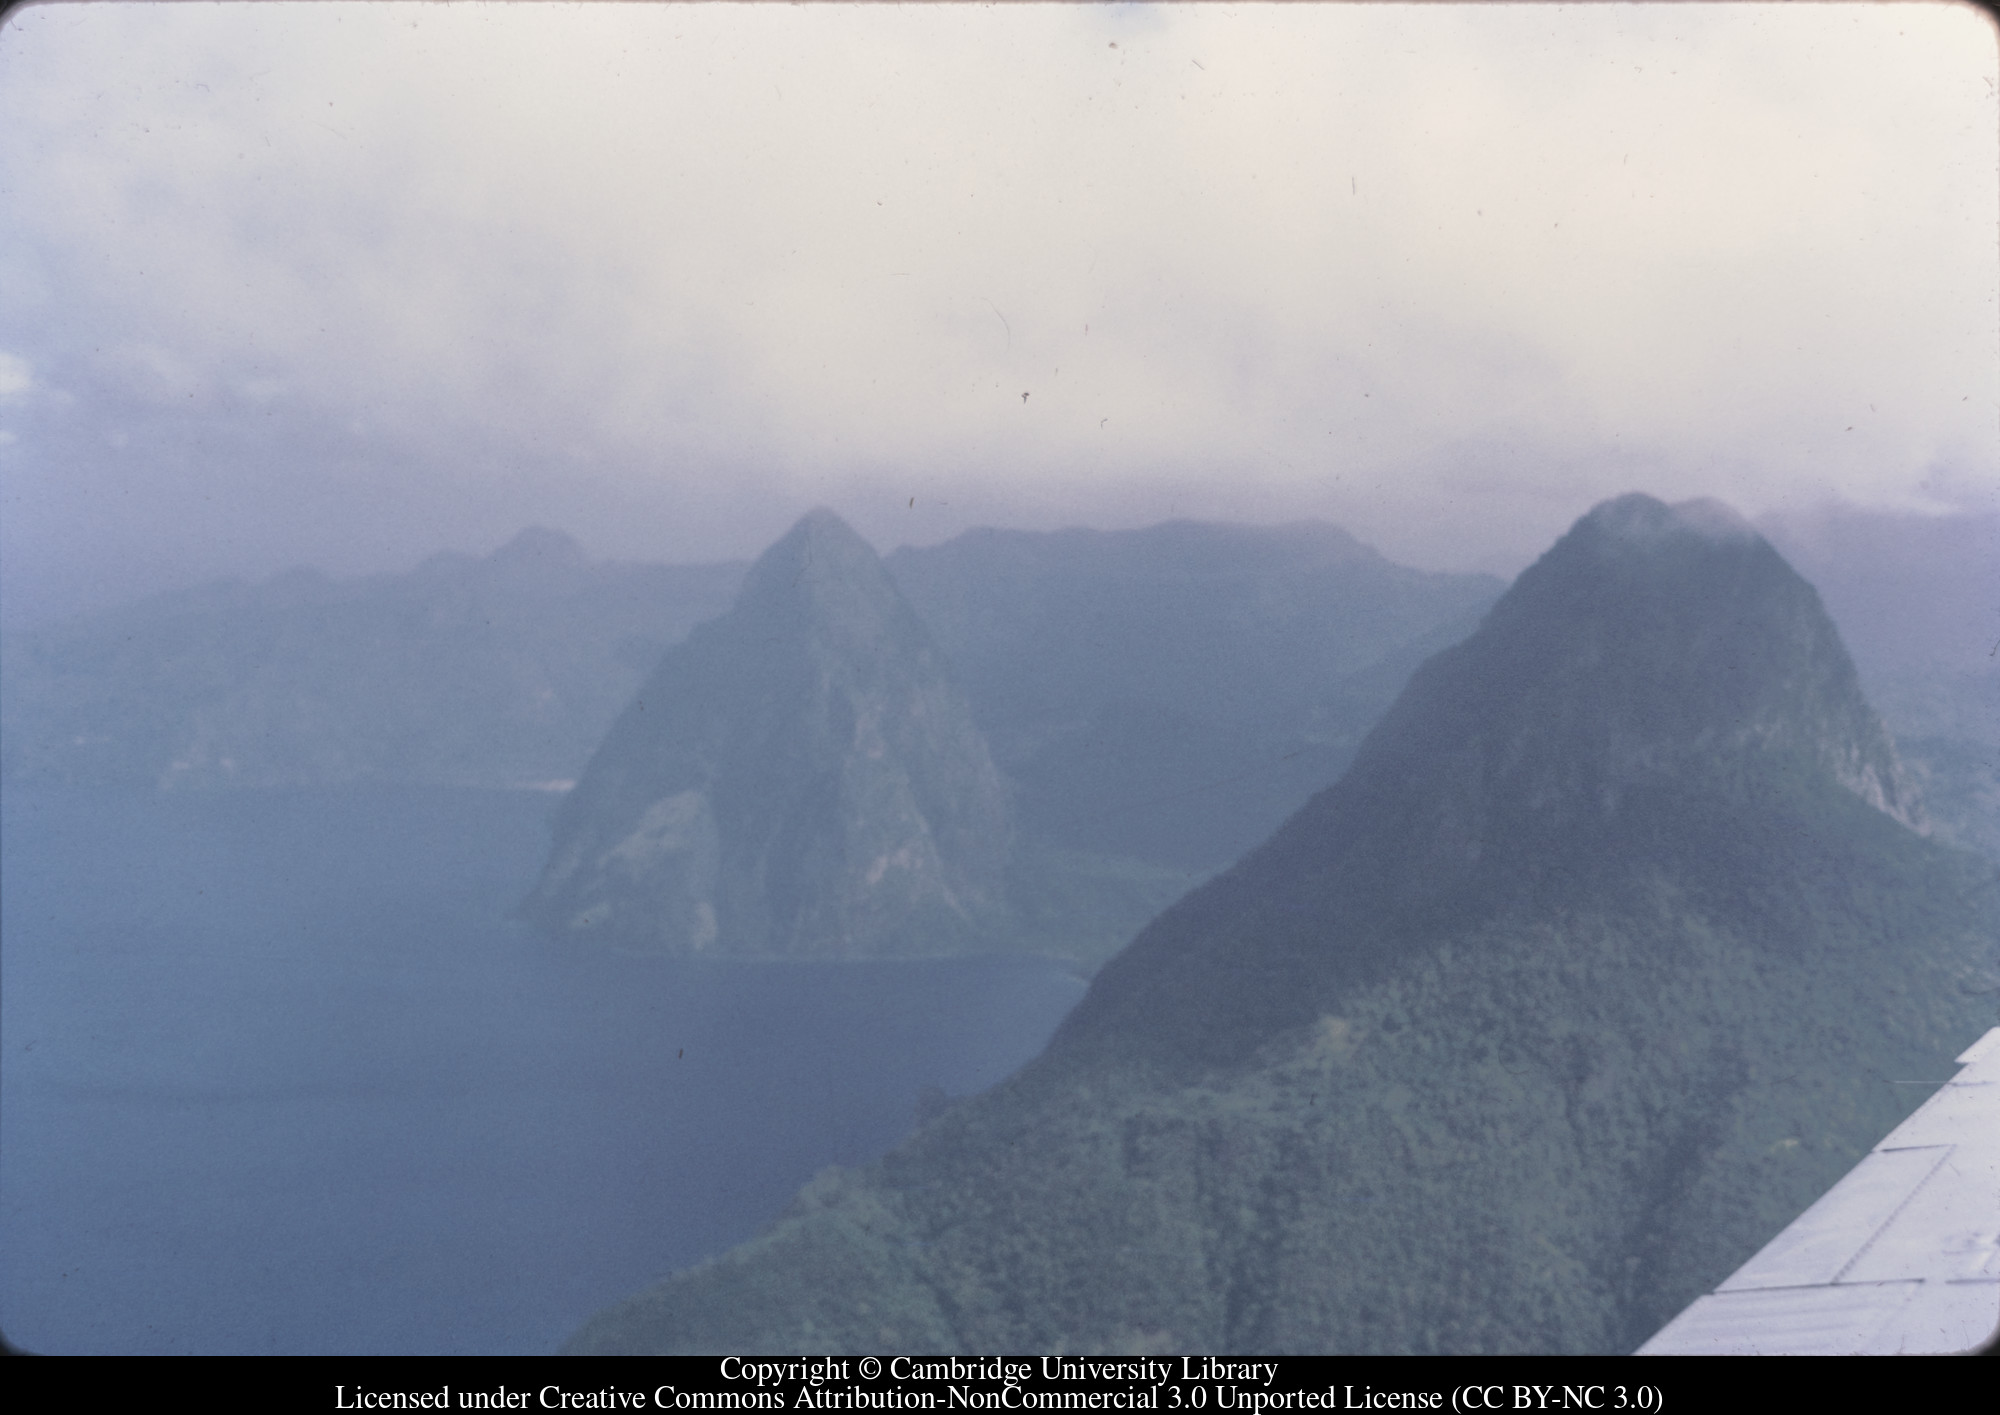 Gros and Petit Pitons from south, 1971-02